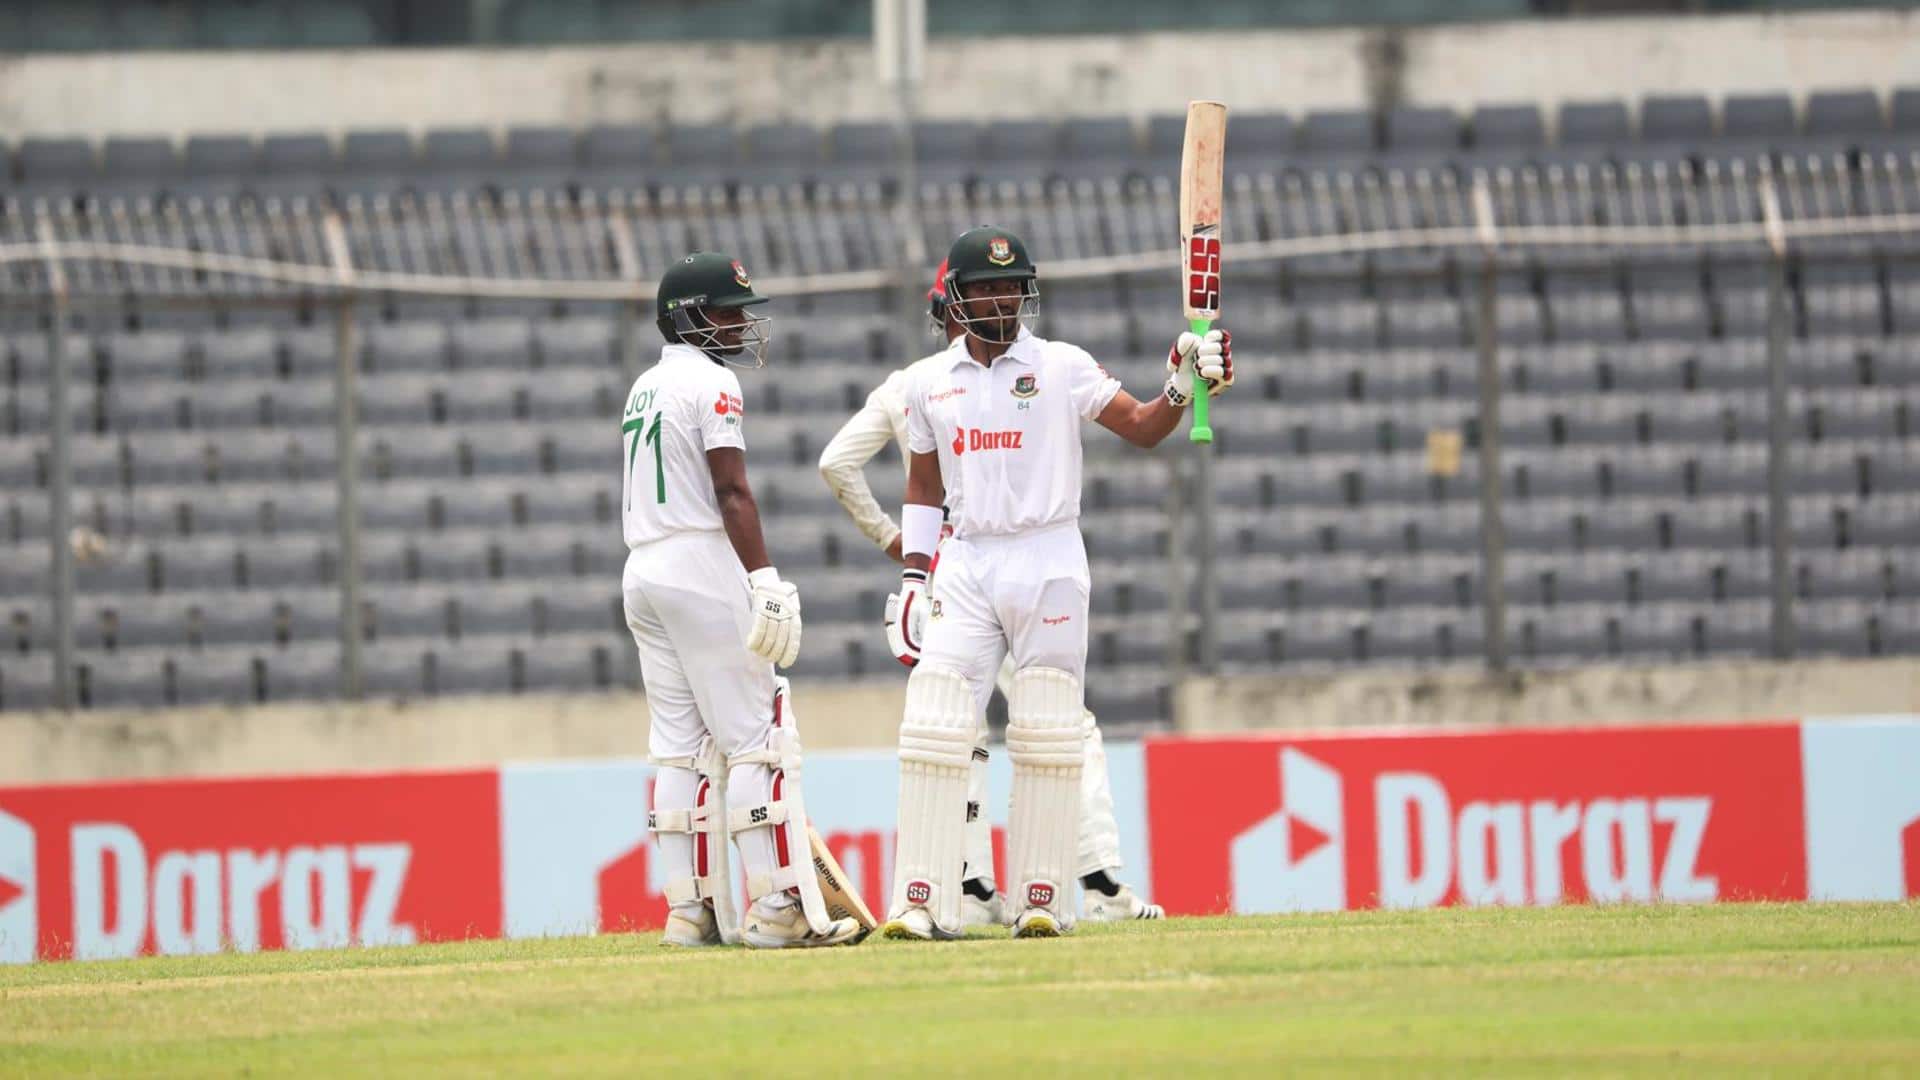 One-off Test, Day 1: Bangladesh score 362/5 versus Afghanistan